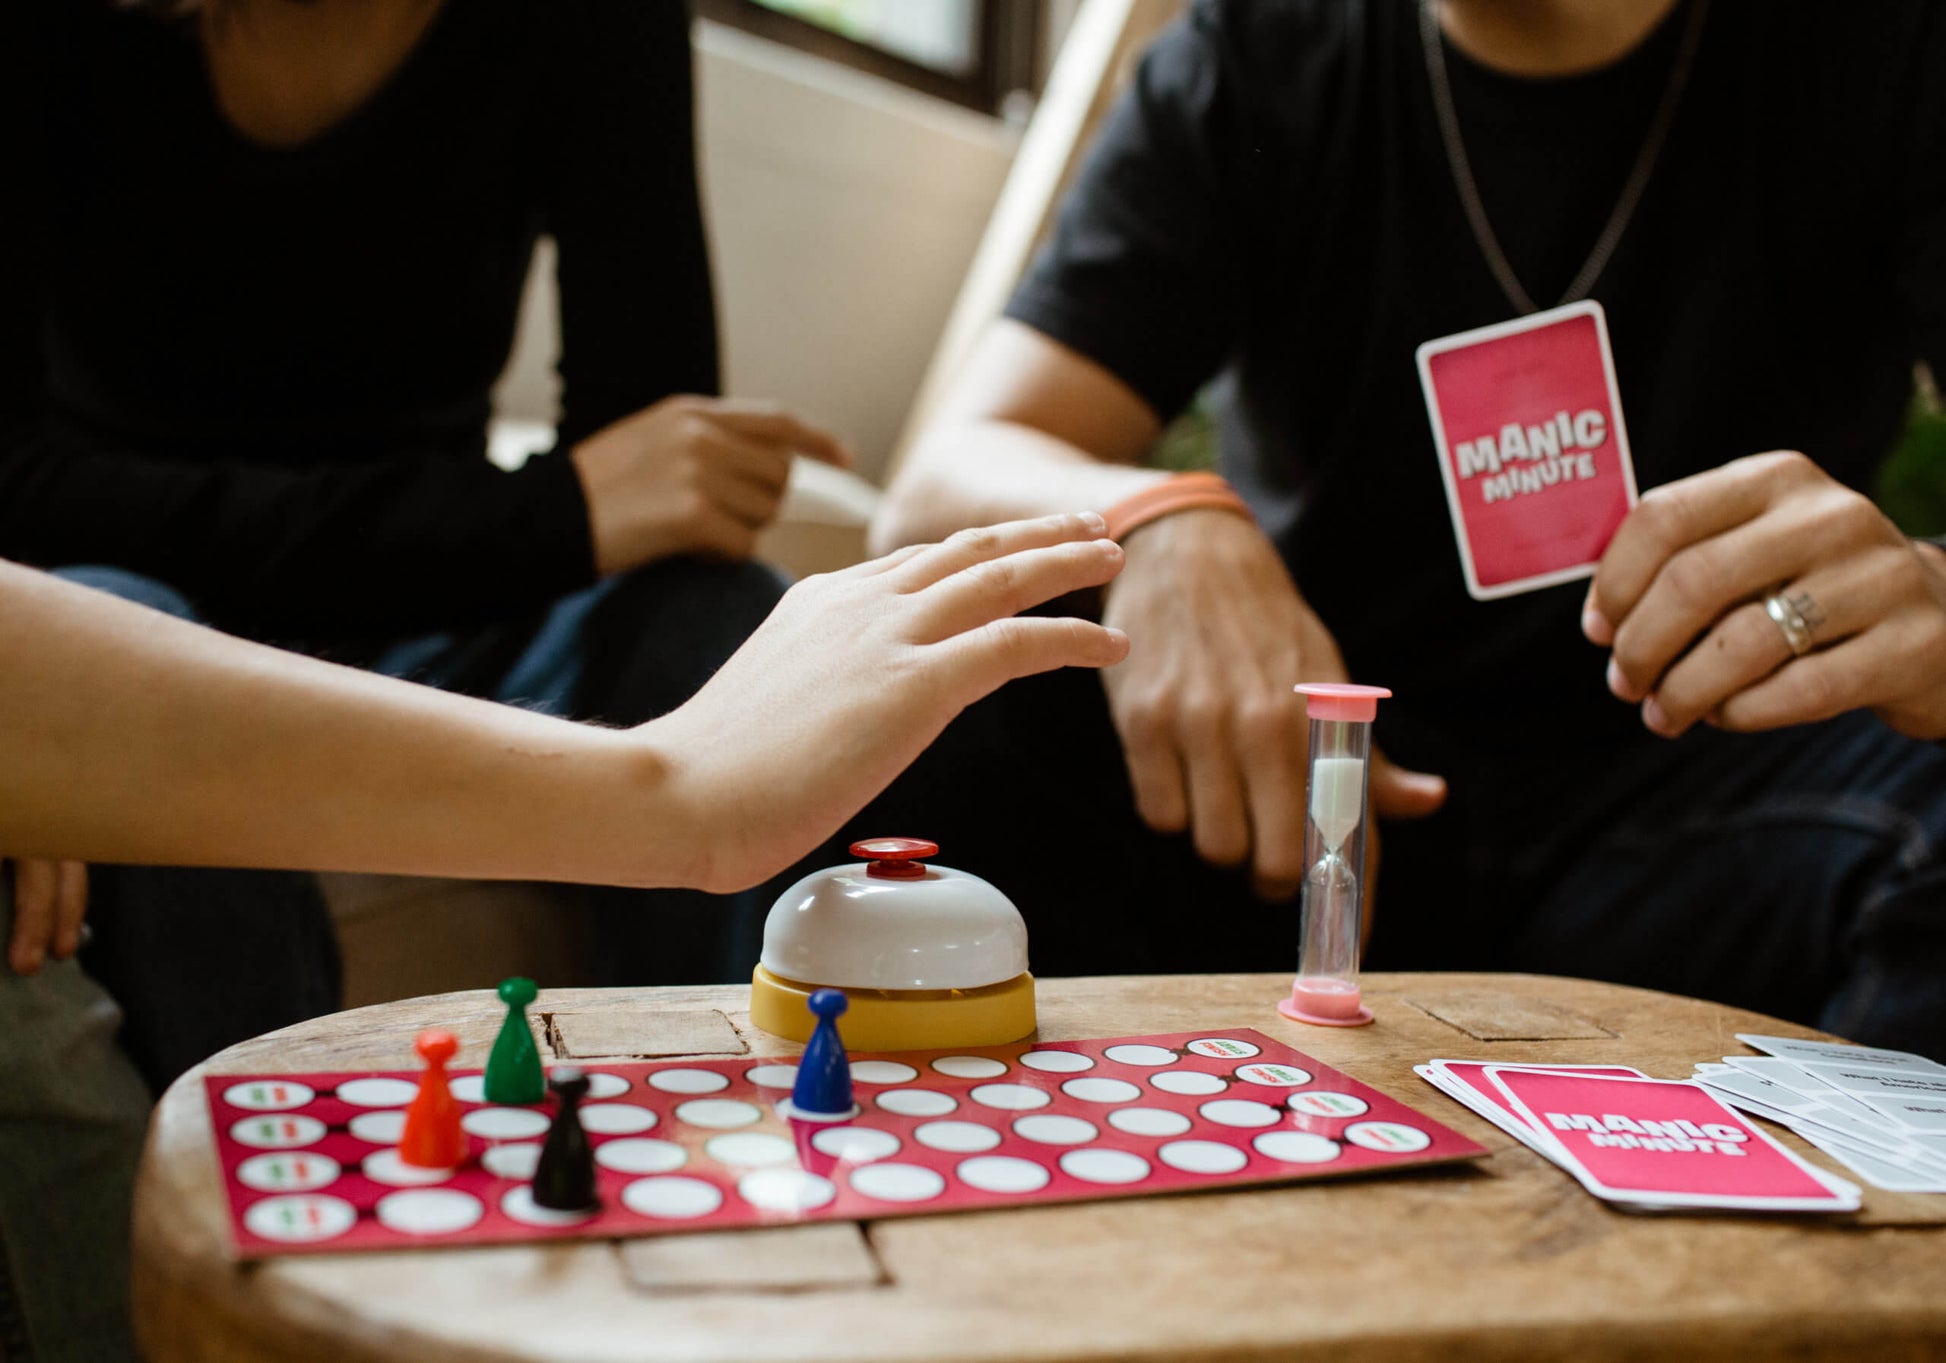  game pieces set up on wooden coffee table with hands playing game.